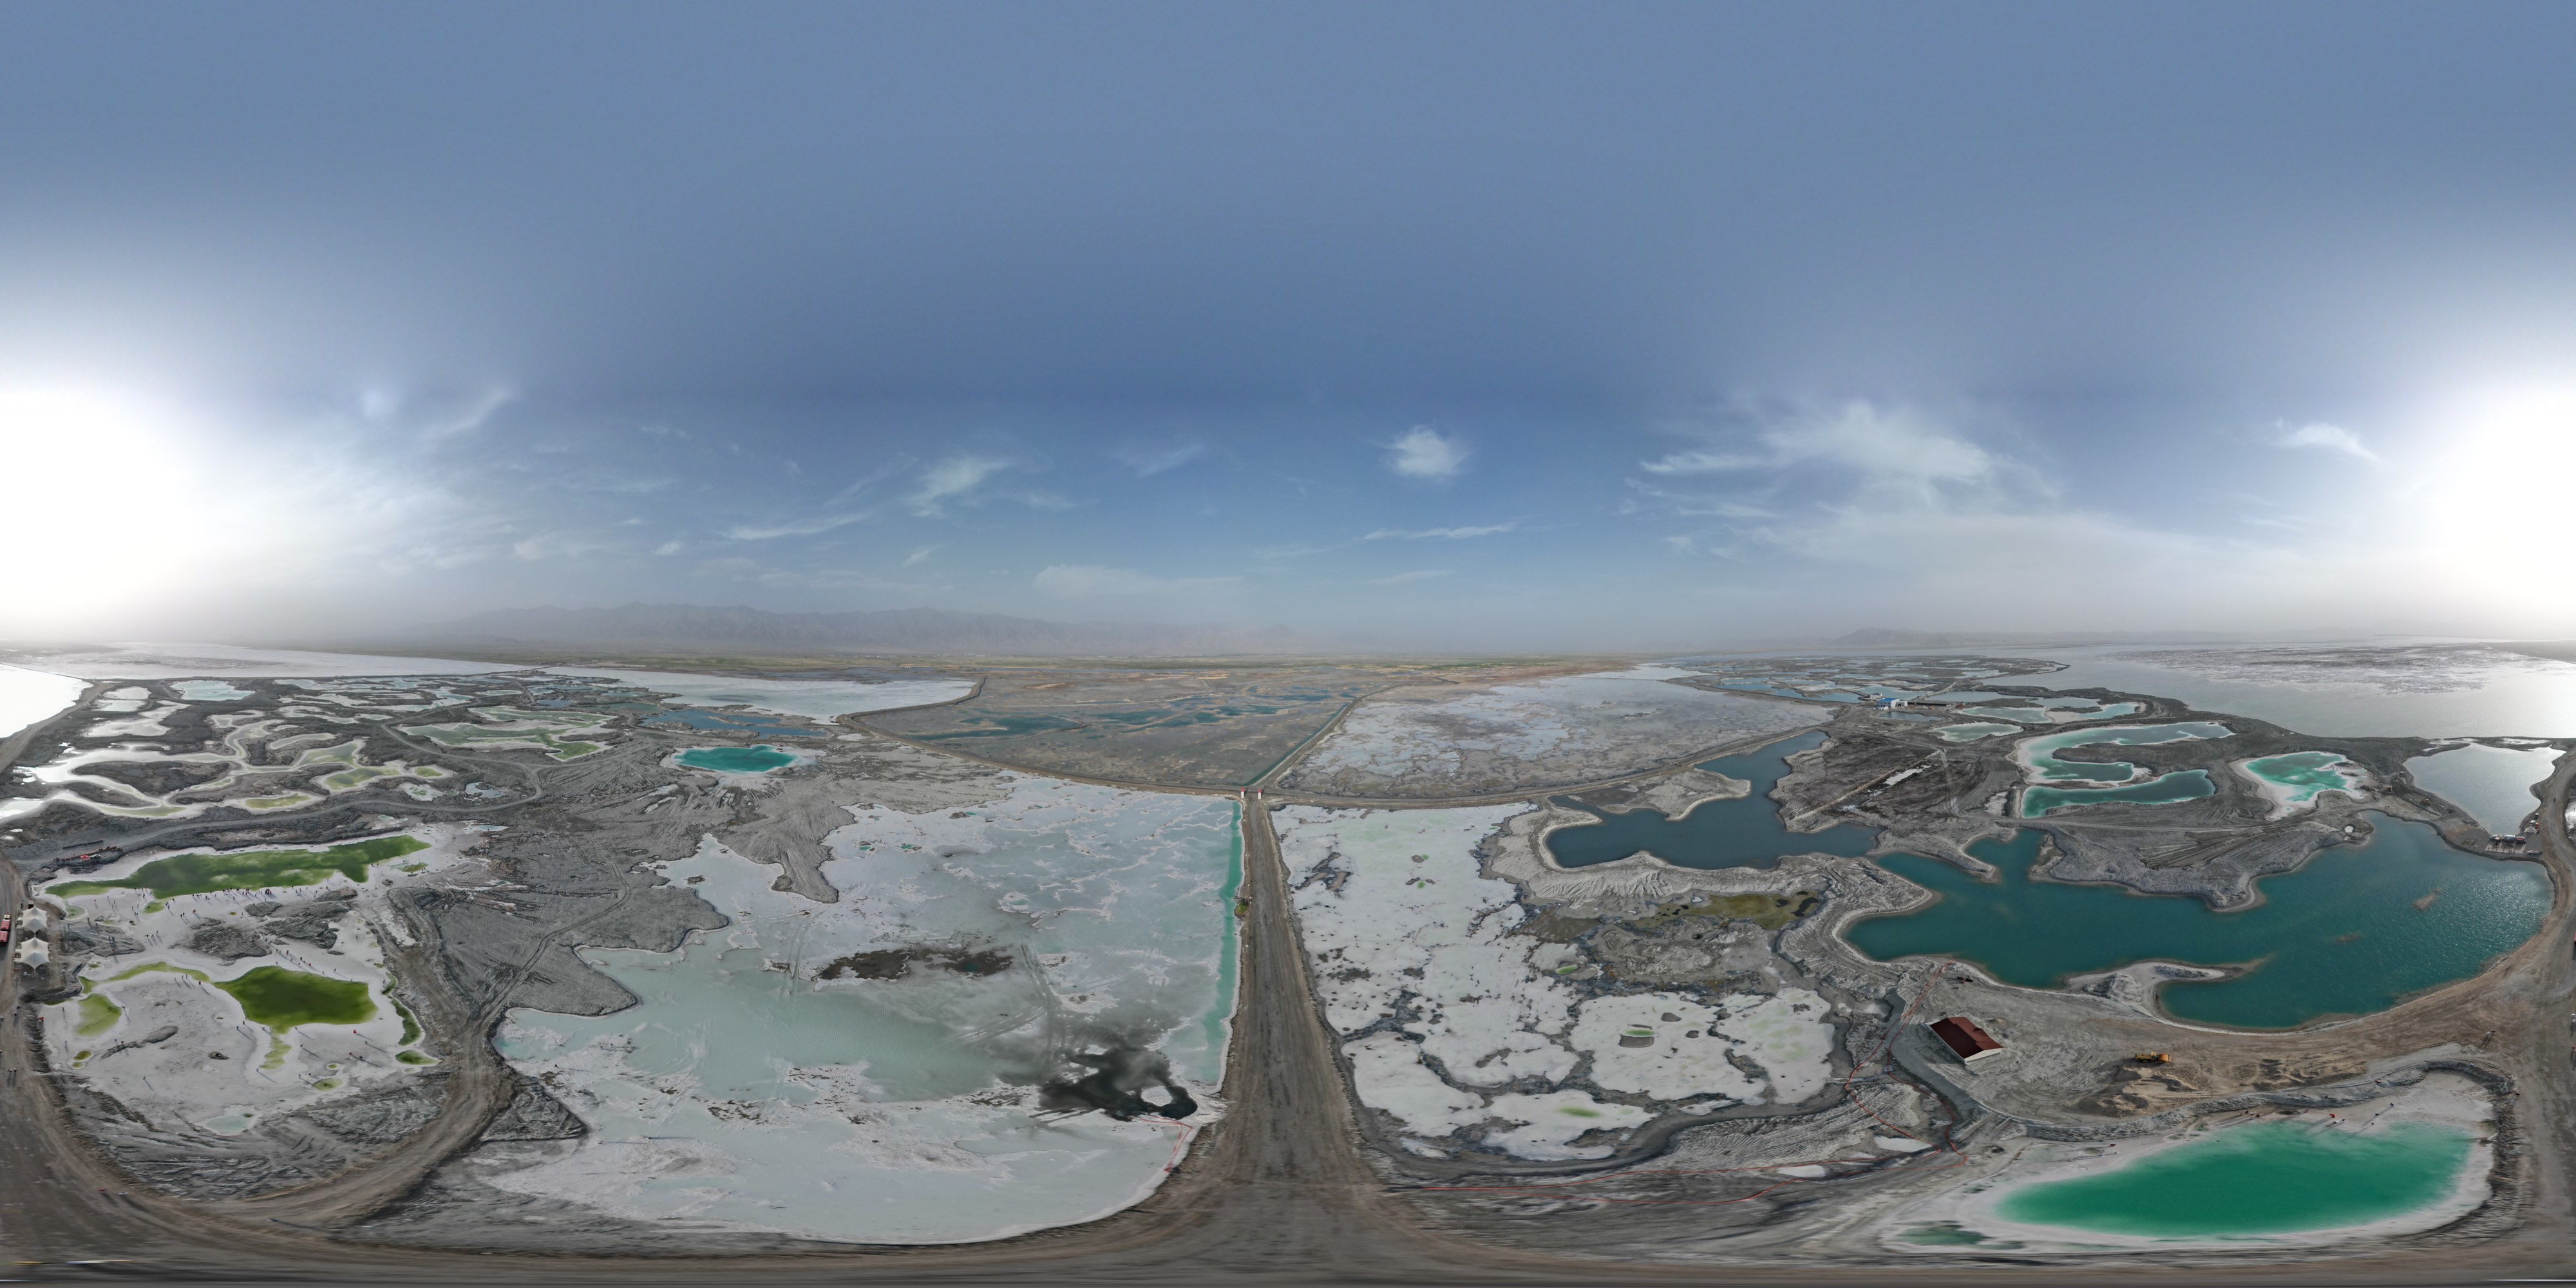 Panoramic view, showing the greener lakes with higher salinity and the bluer ones with lower salinity